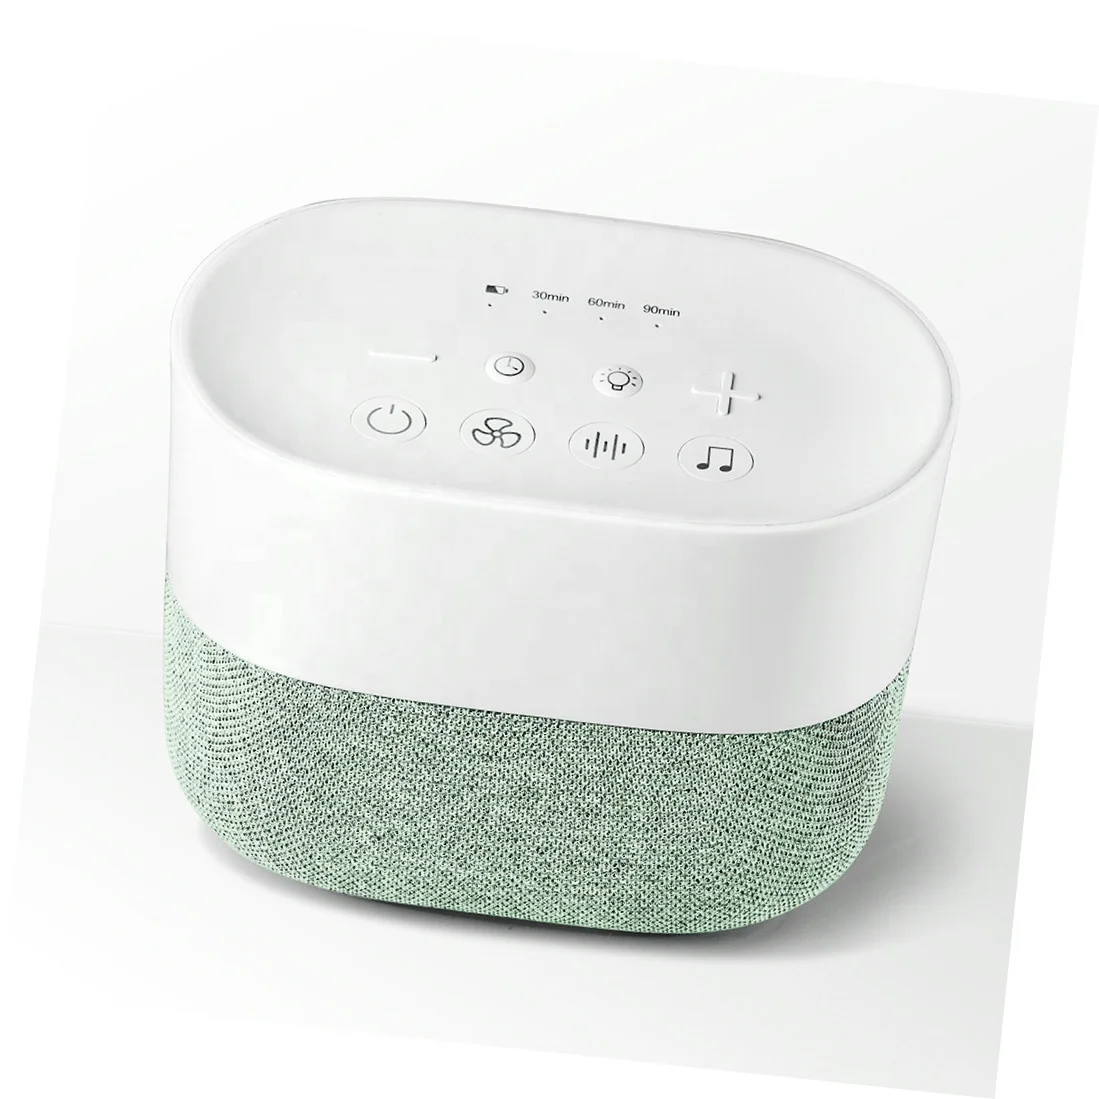 OEM sleeping help devices white noise machine for baby sleeping